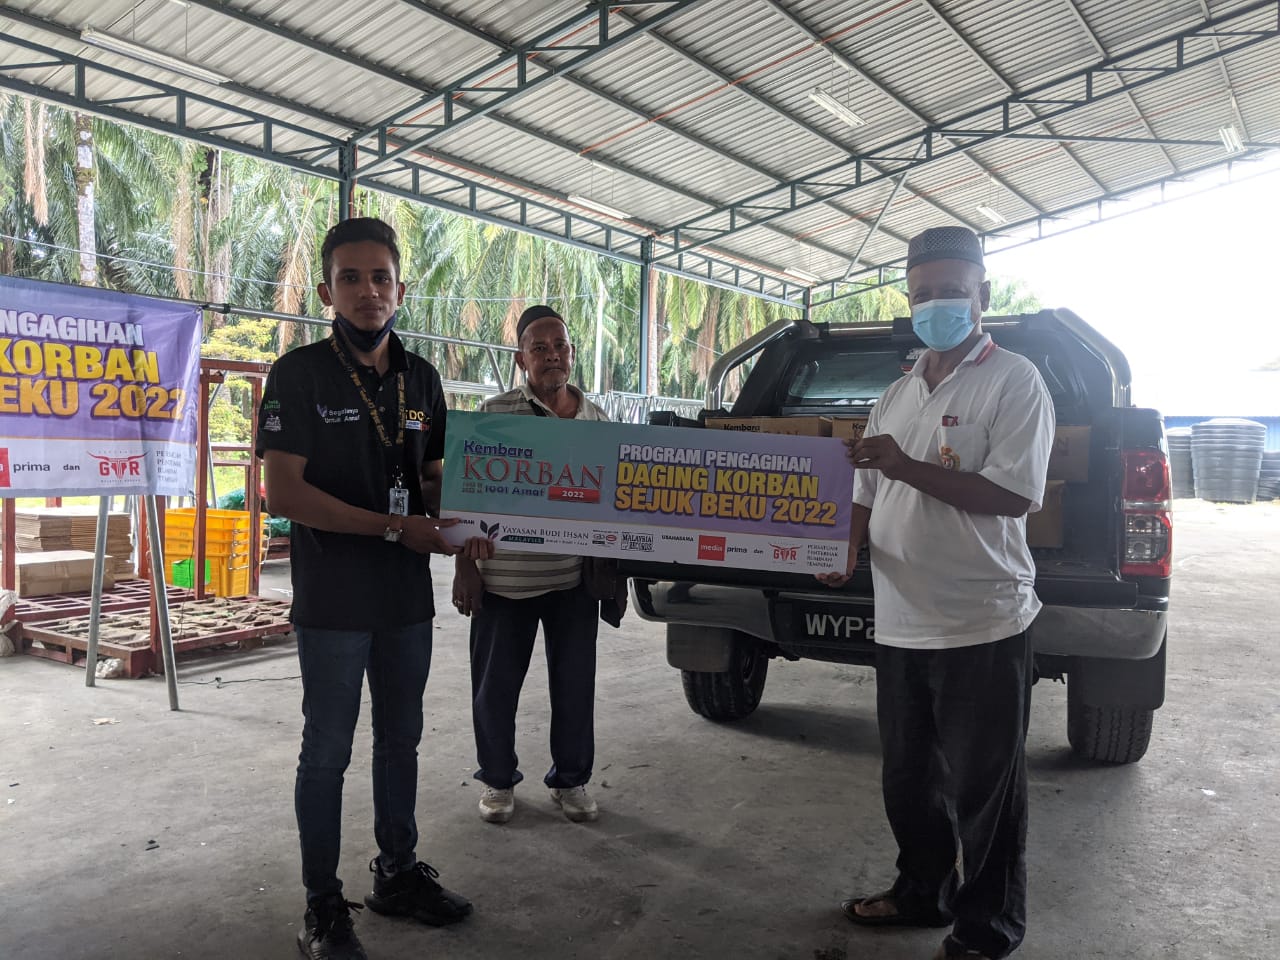 You are currently viewing Qurbani Frozen Meat Distribution Program, 1001 Asnaf 2022 Qurbani Campaign to Kampung Rinching Hulu Mosque, Semenyih